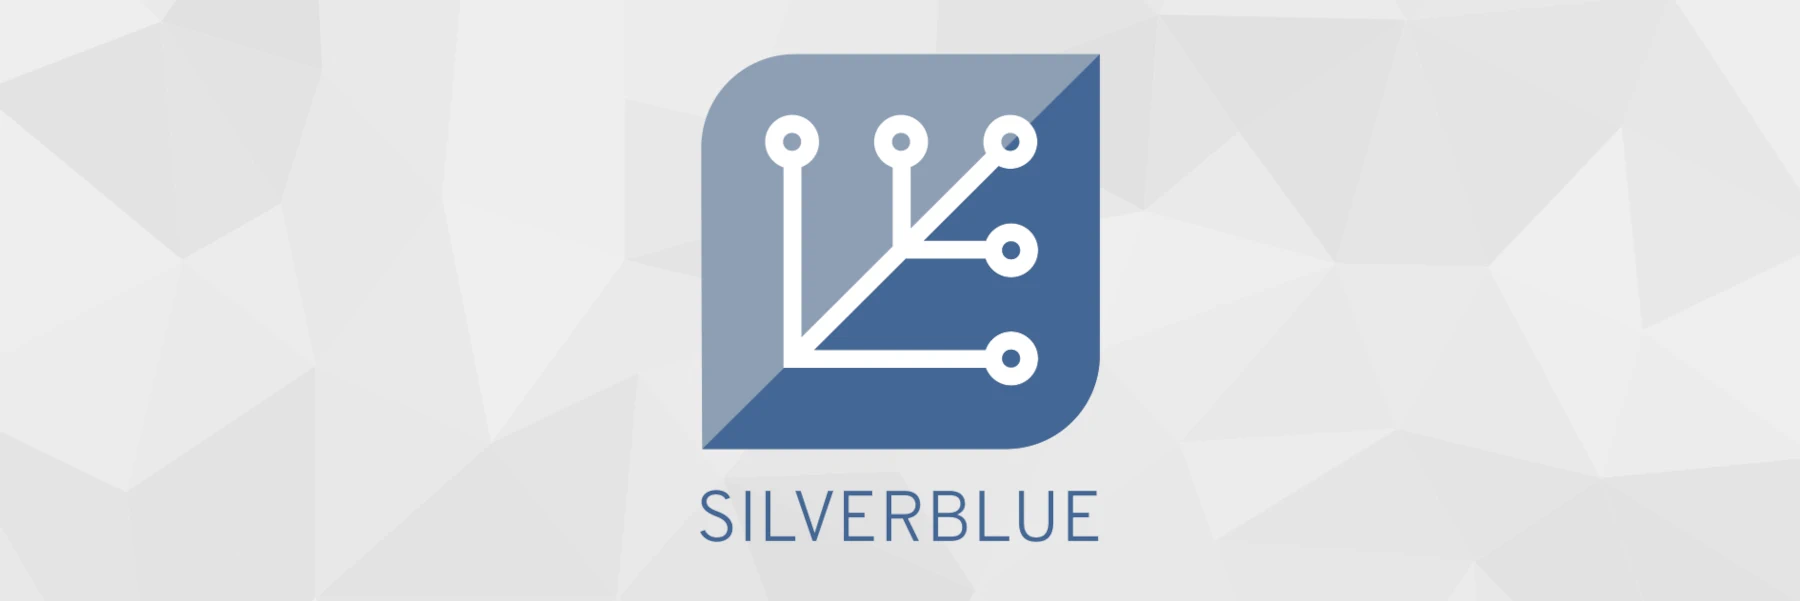 Bisecting Regressions in Fedora Silverblue